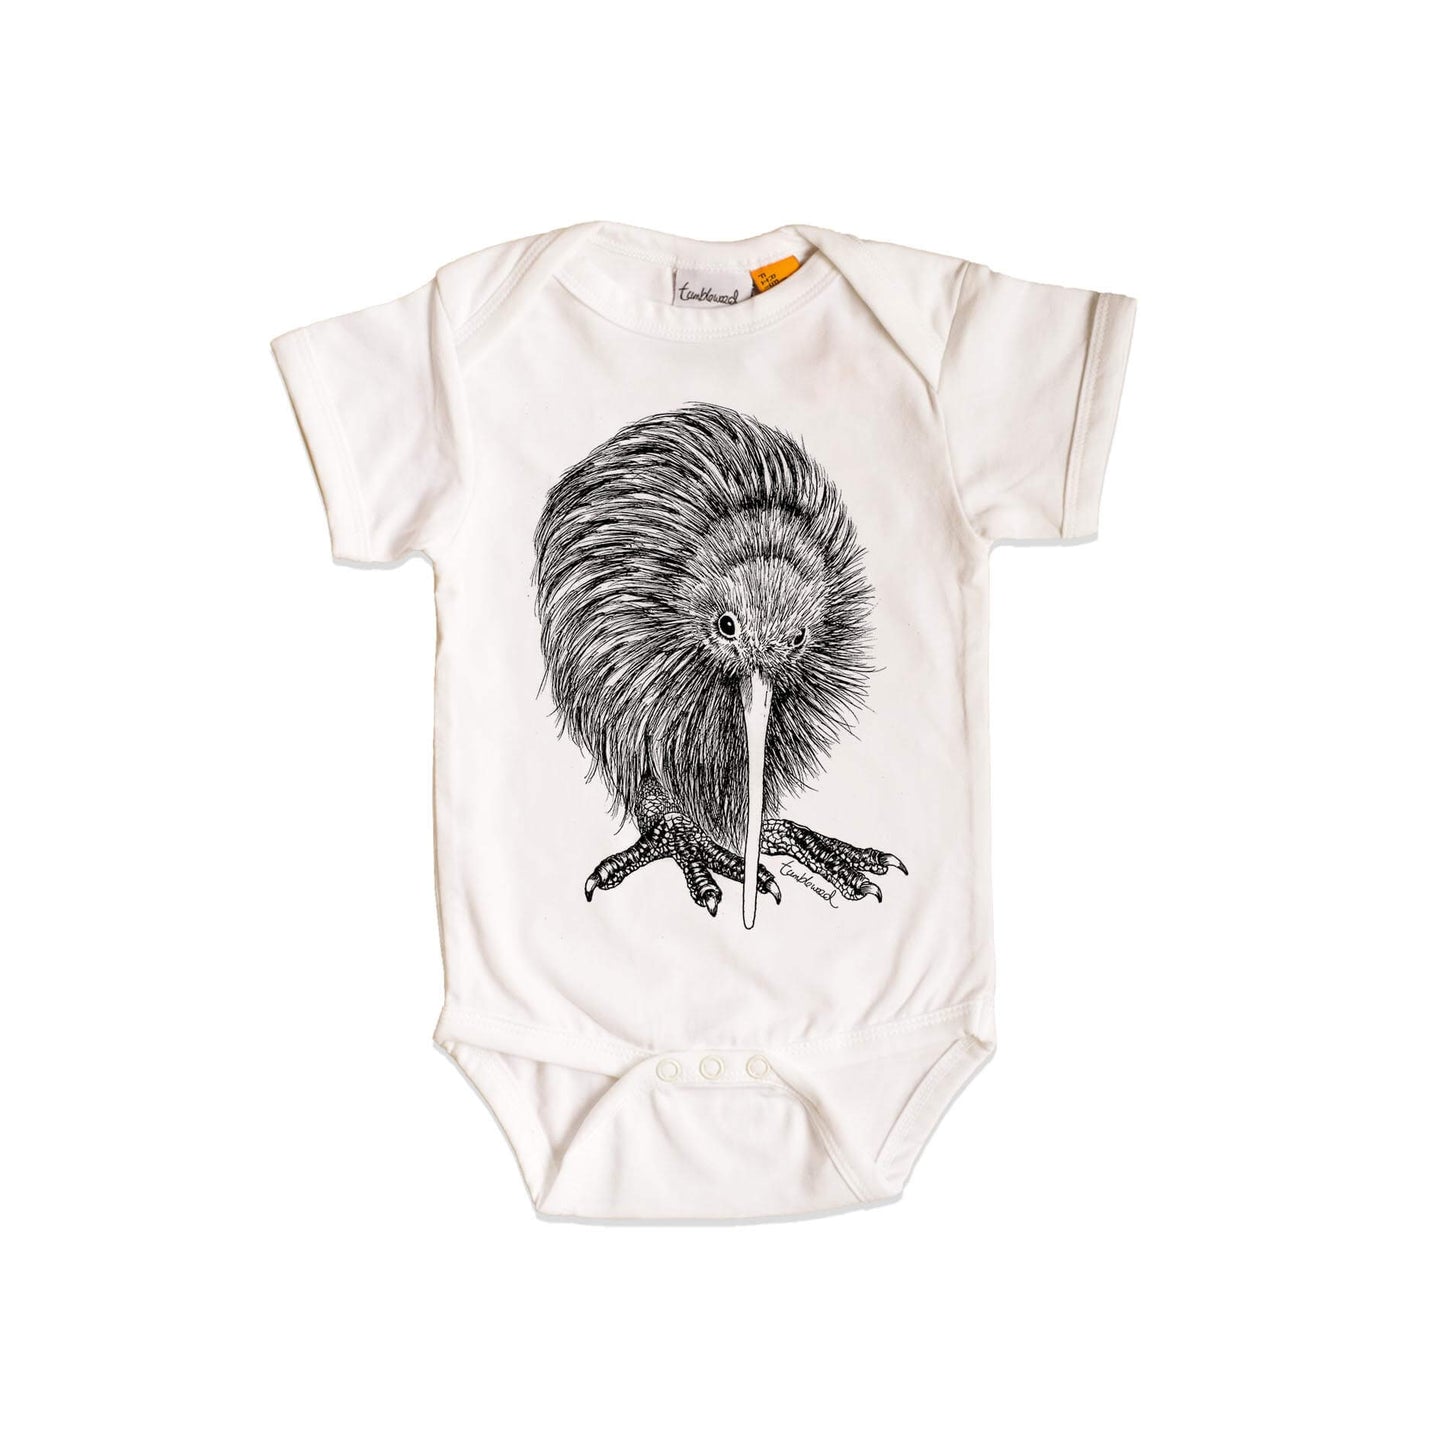 Short sleeved, white, organic cotton, baby onesie featuring a screen printed Kiwi design.